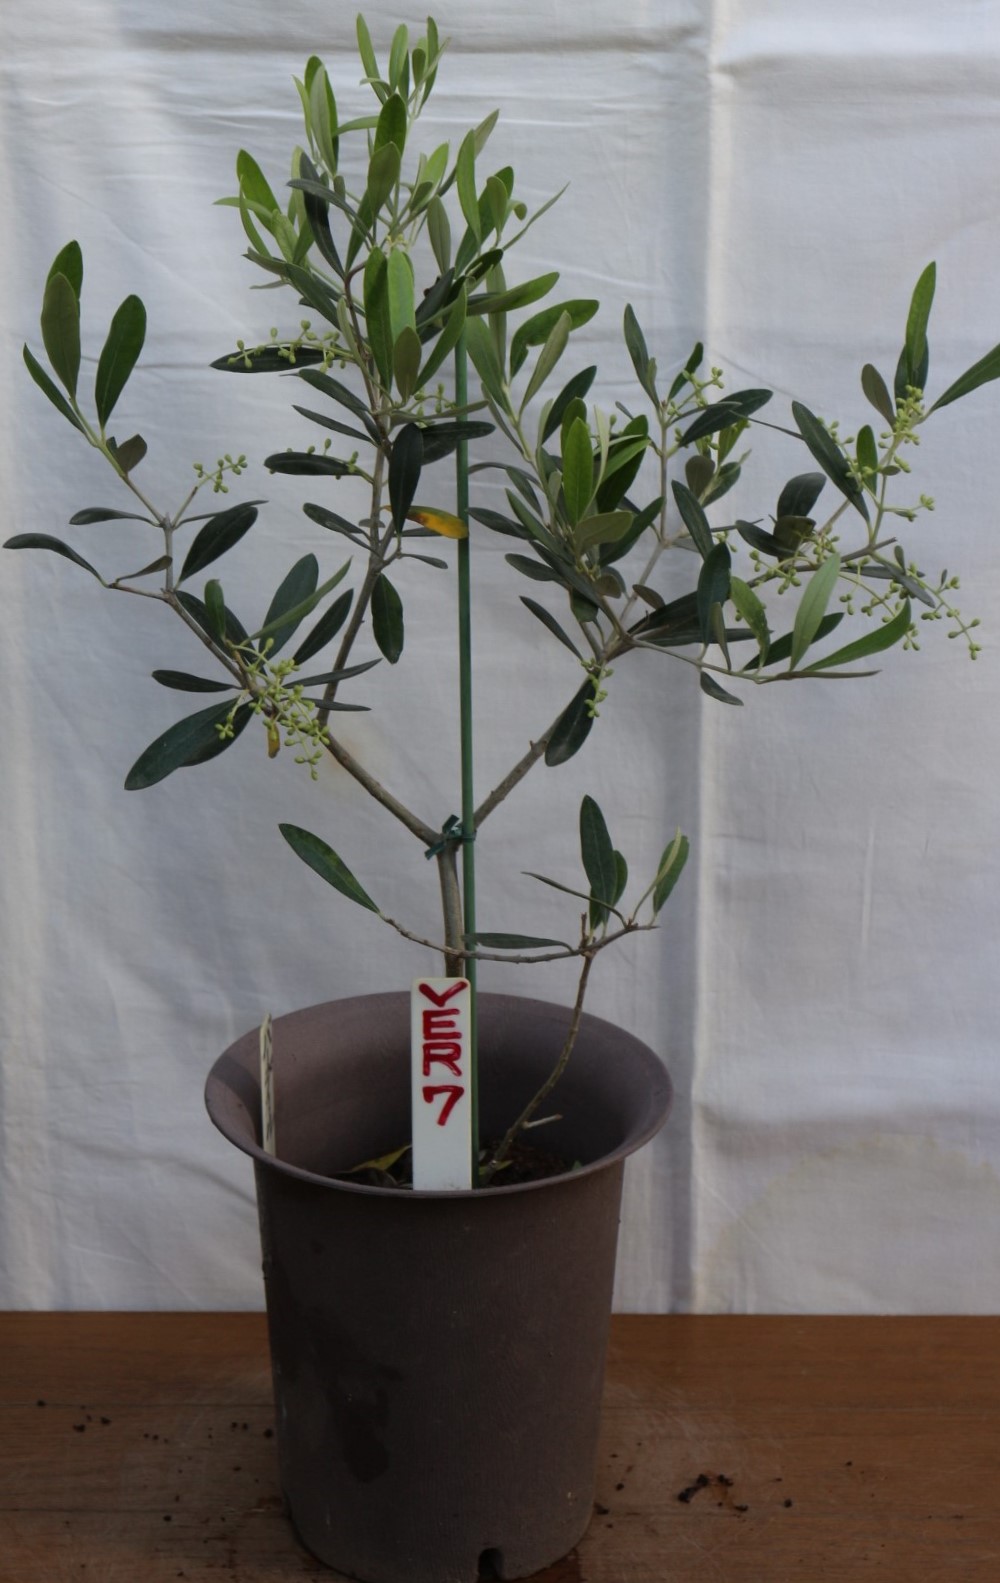  setting postage .,2 pot (5 number,2 goods kind ). olive. tree, pot .( sapling ) also selectable. height of tree 60cm~70cm, image * commodity information from please choose (5wp-2x)